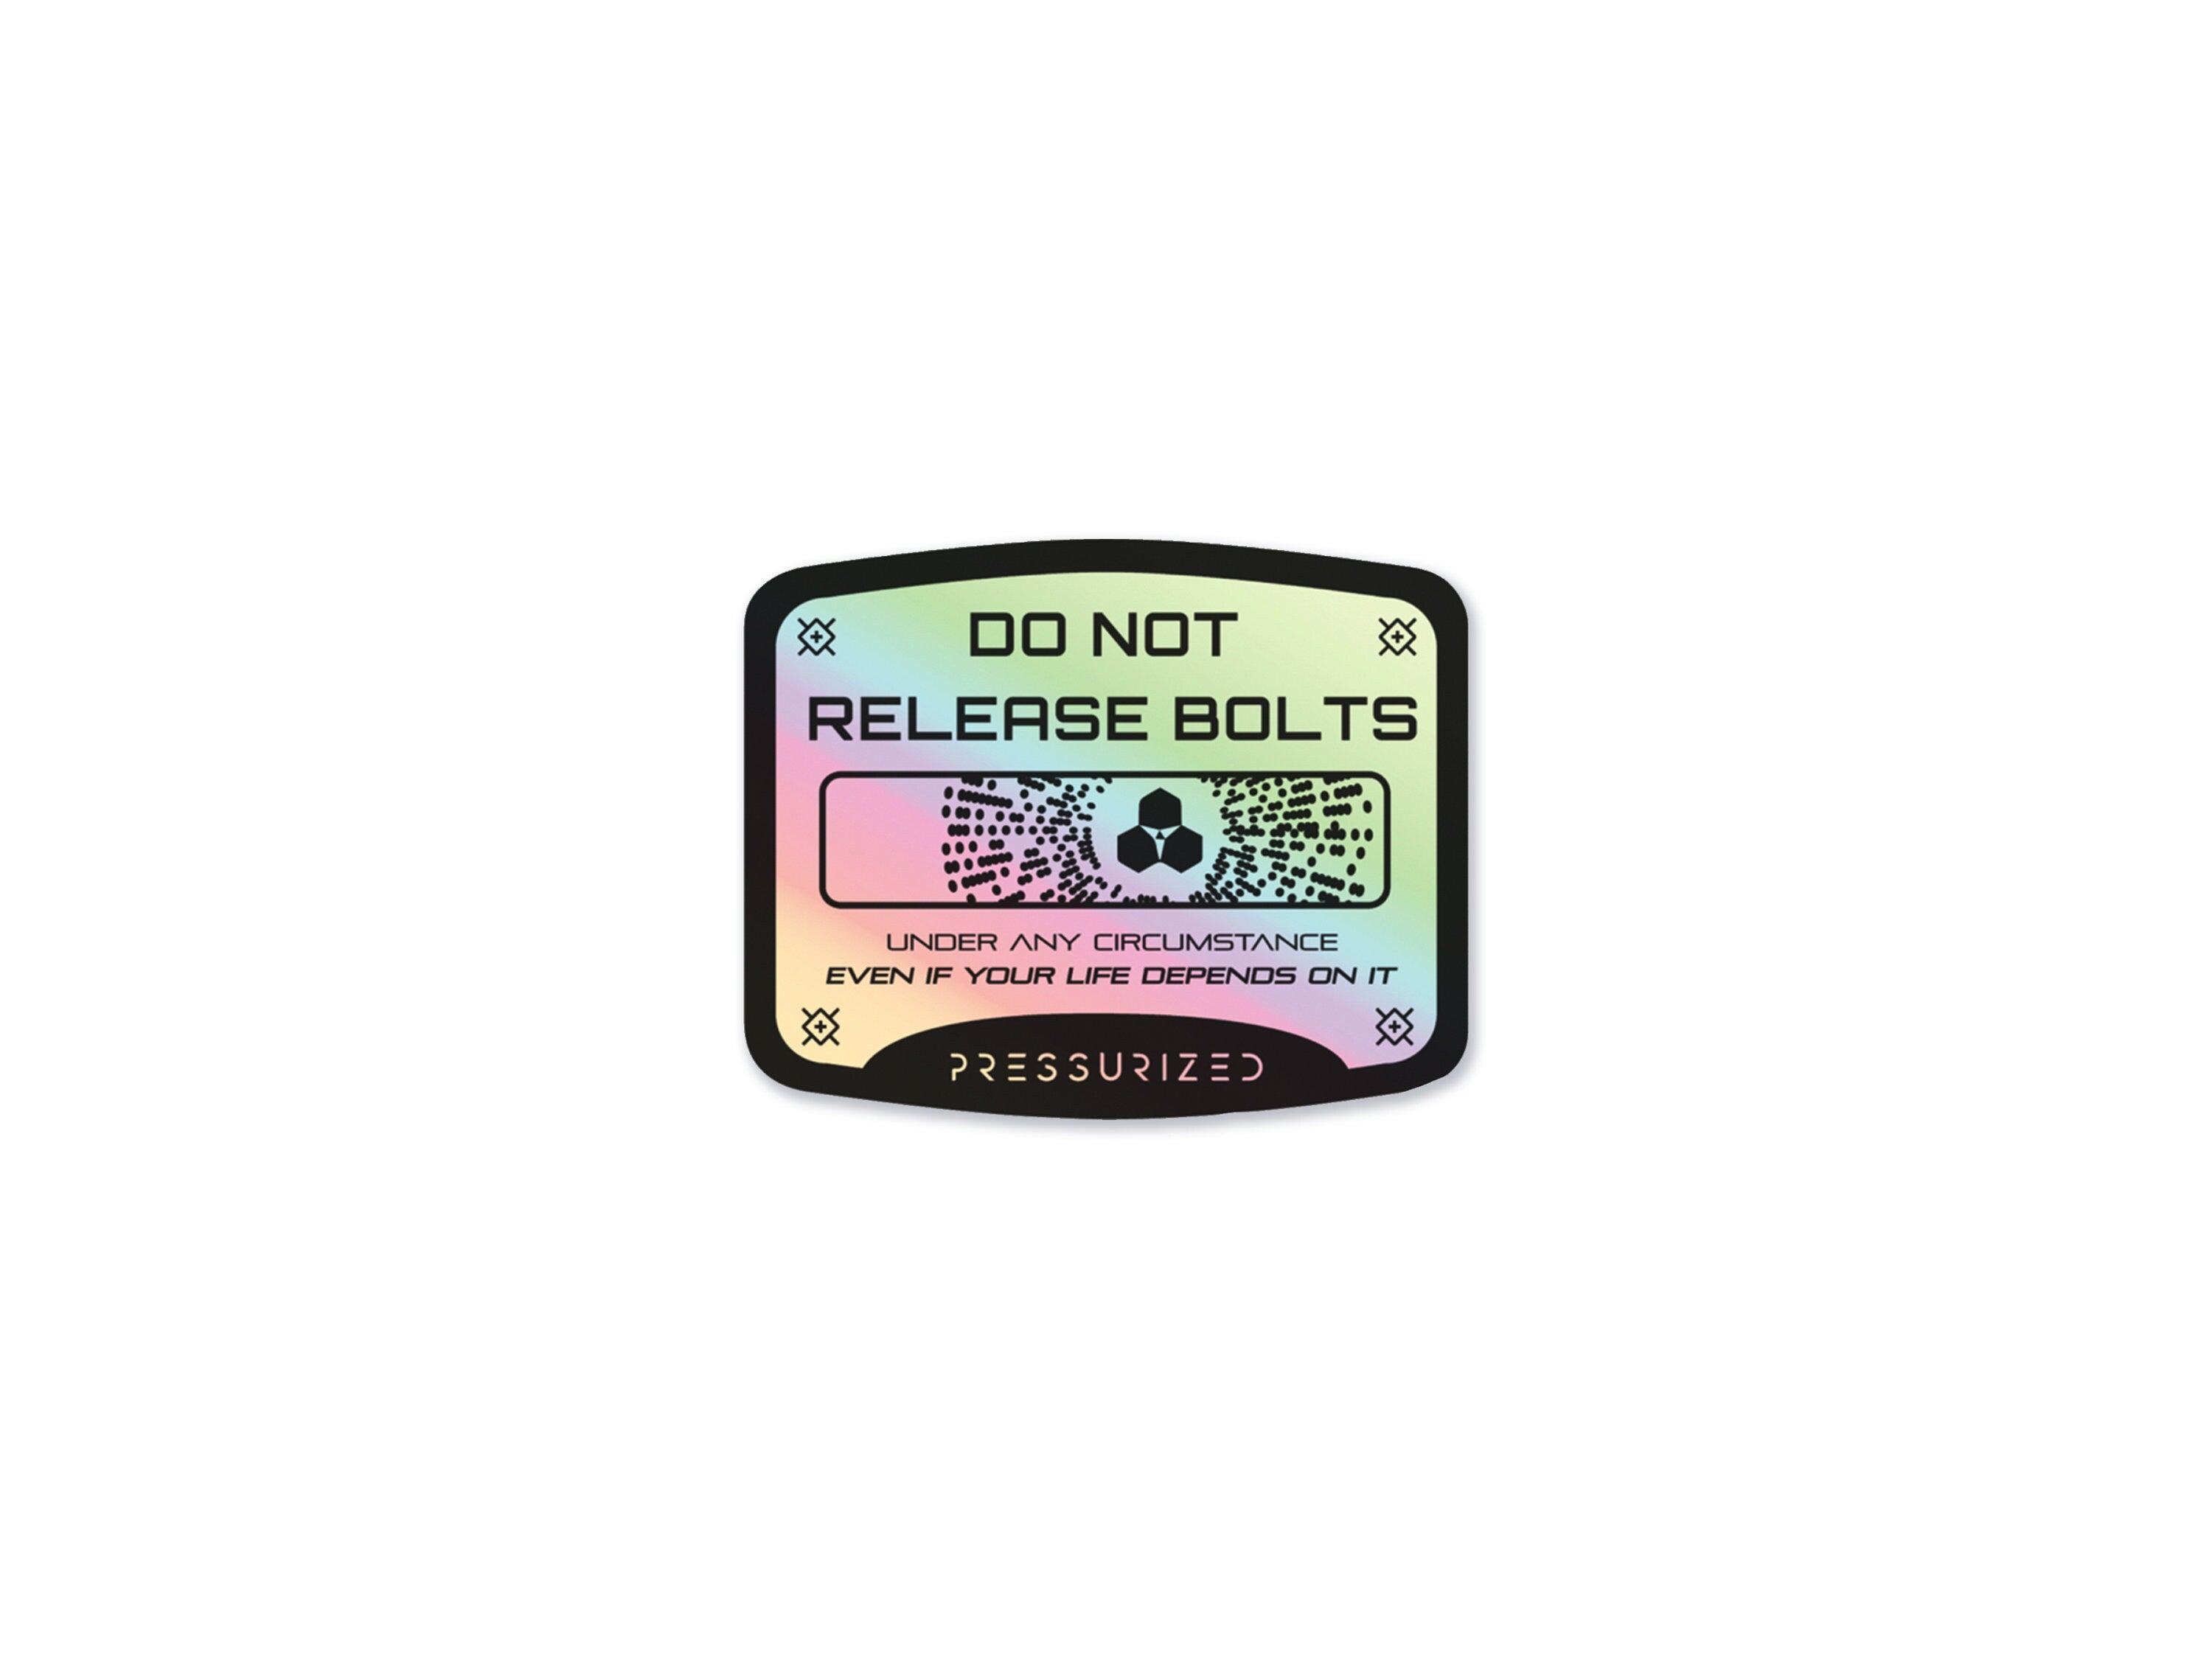 Lost Containment Holographic Decal - Cyberpunk Futuristic Vinyl Laptop Sticker - Sci-fi Water Bottle Decal